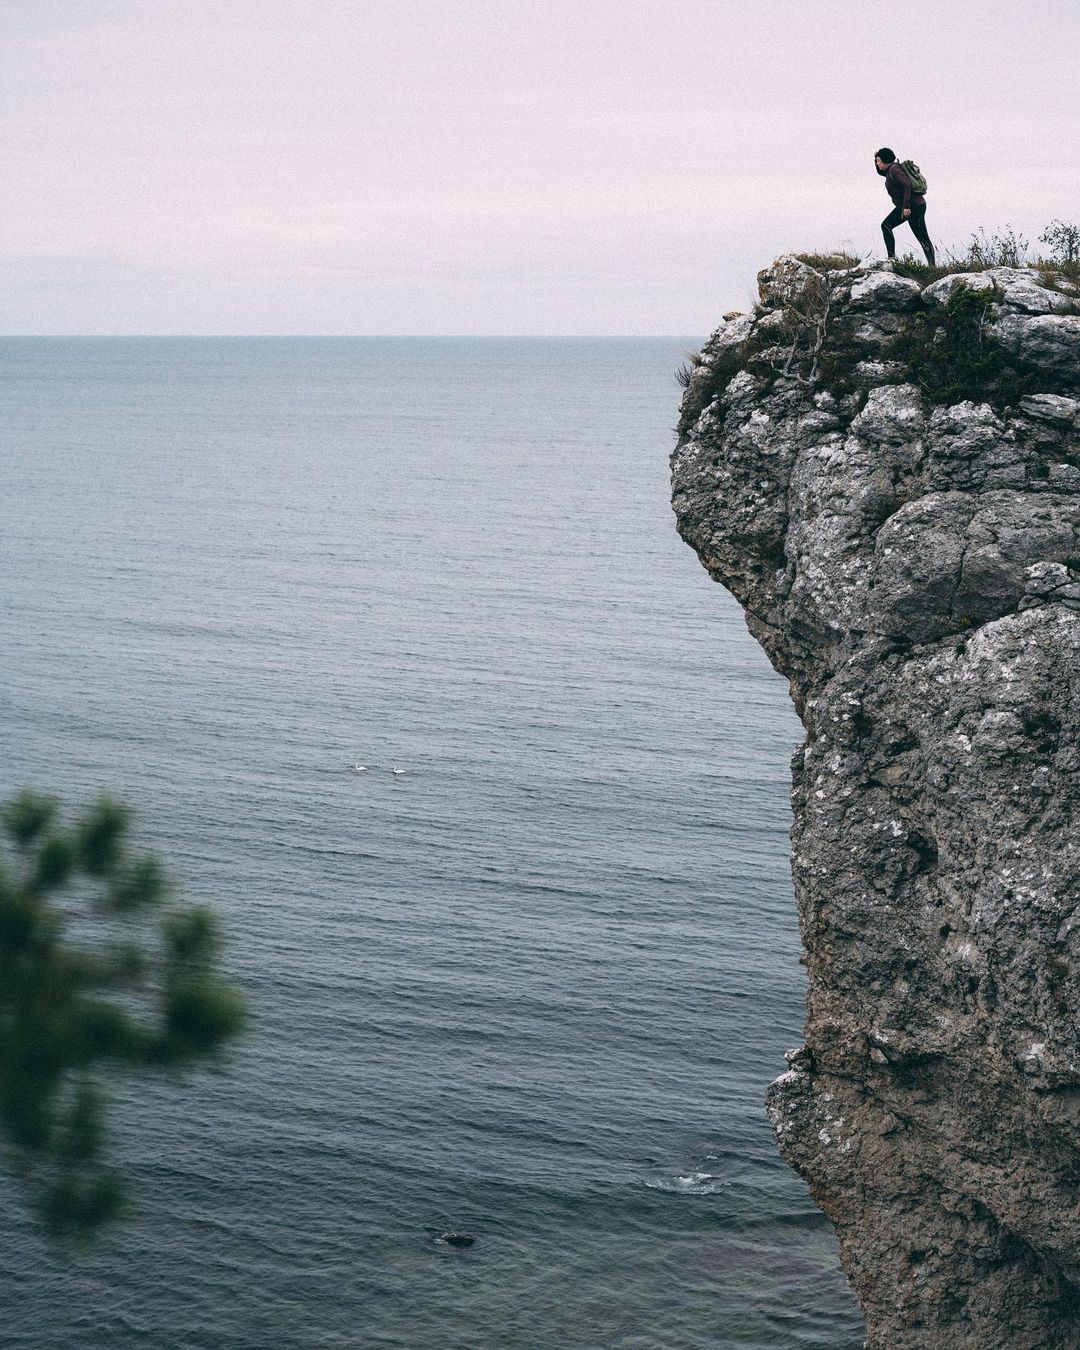 A woman is standing at the edge of a cliff. Down below, the wind ruffles the water. The sky is overcast.